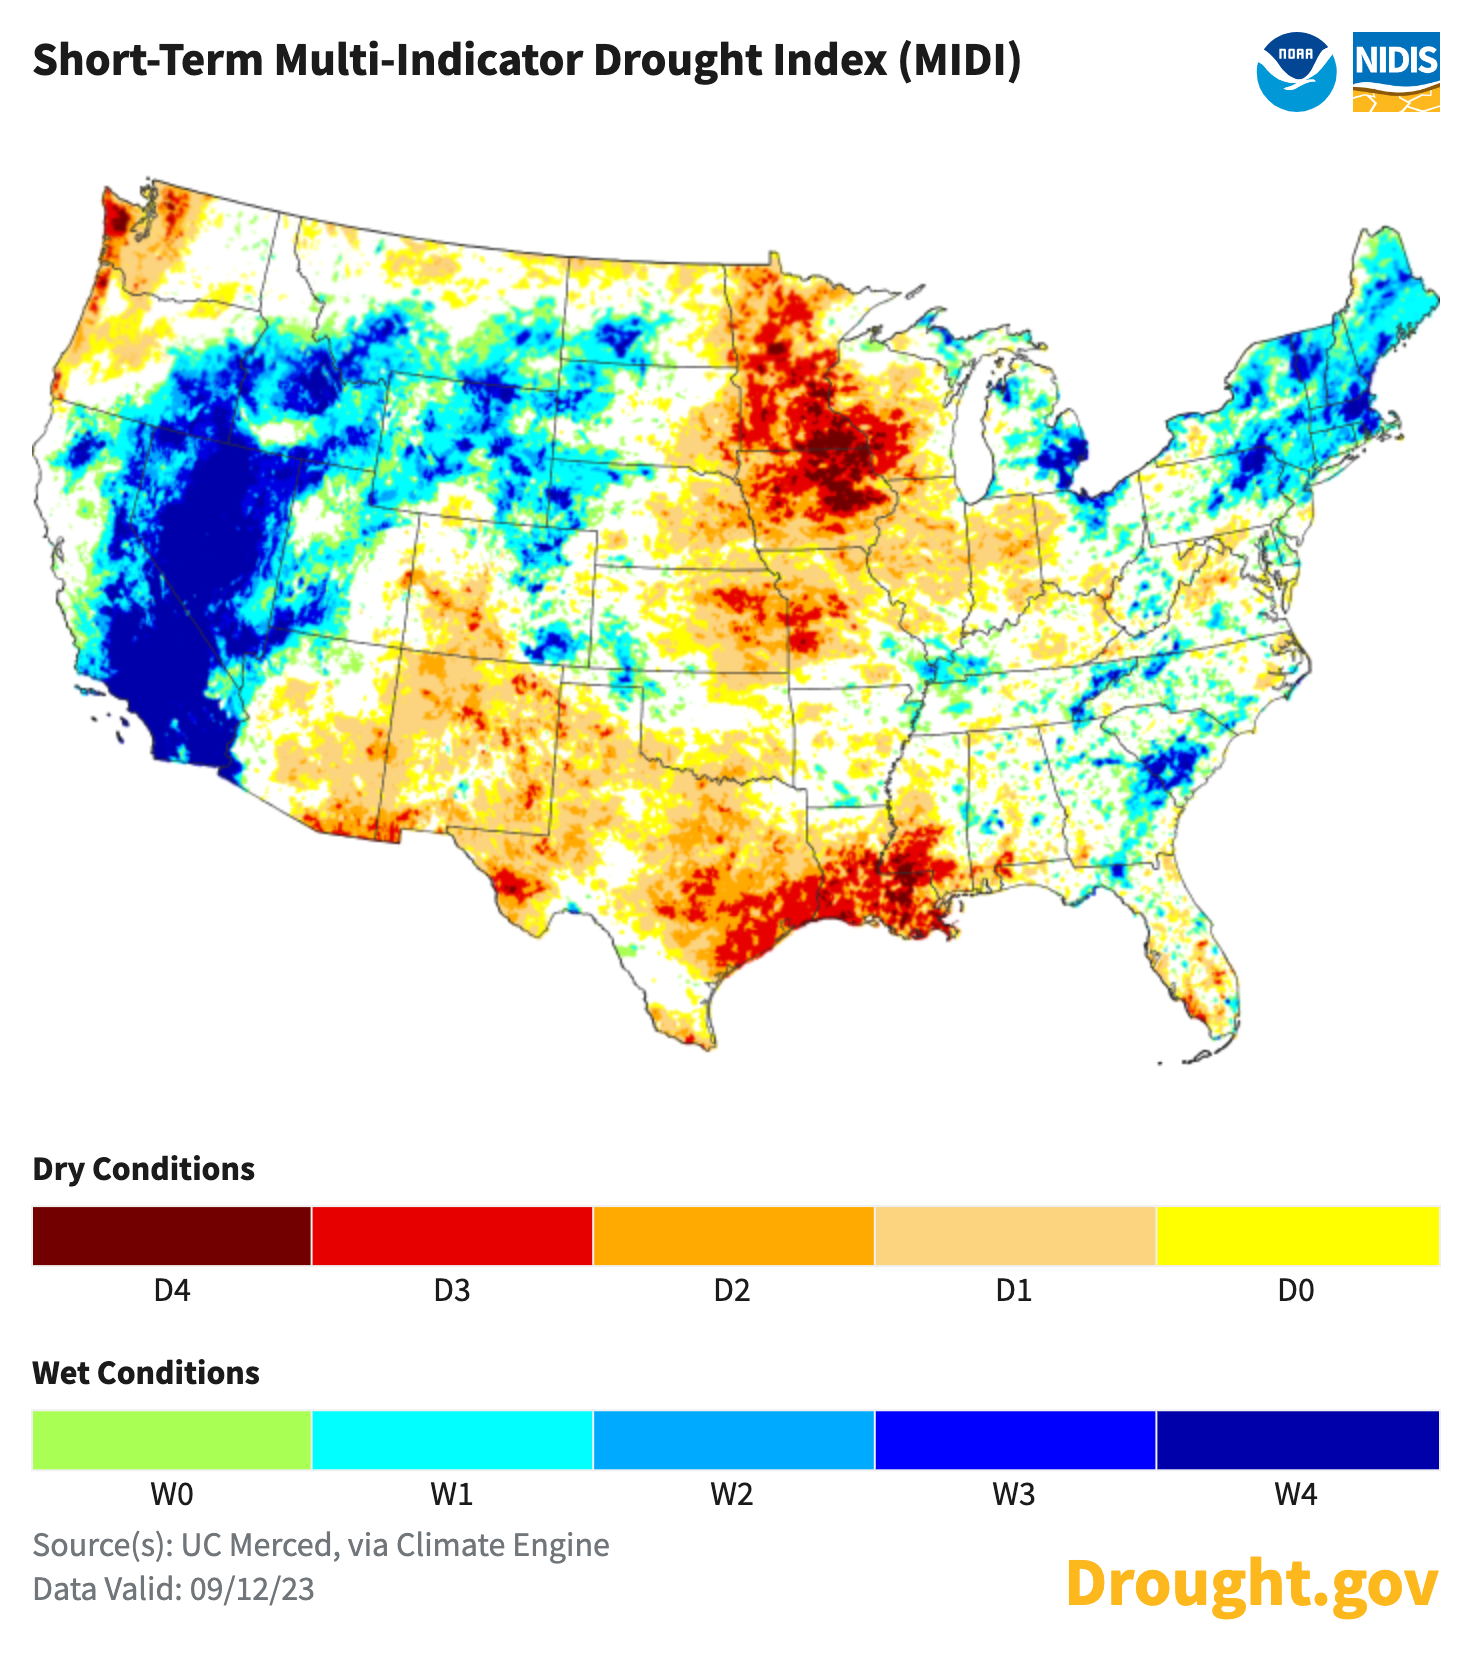 This map shows the Short-Term Multi-Indicator Drought Index for the contiguous United States, updated September 12, 2023.